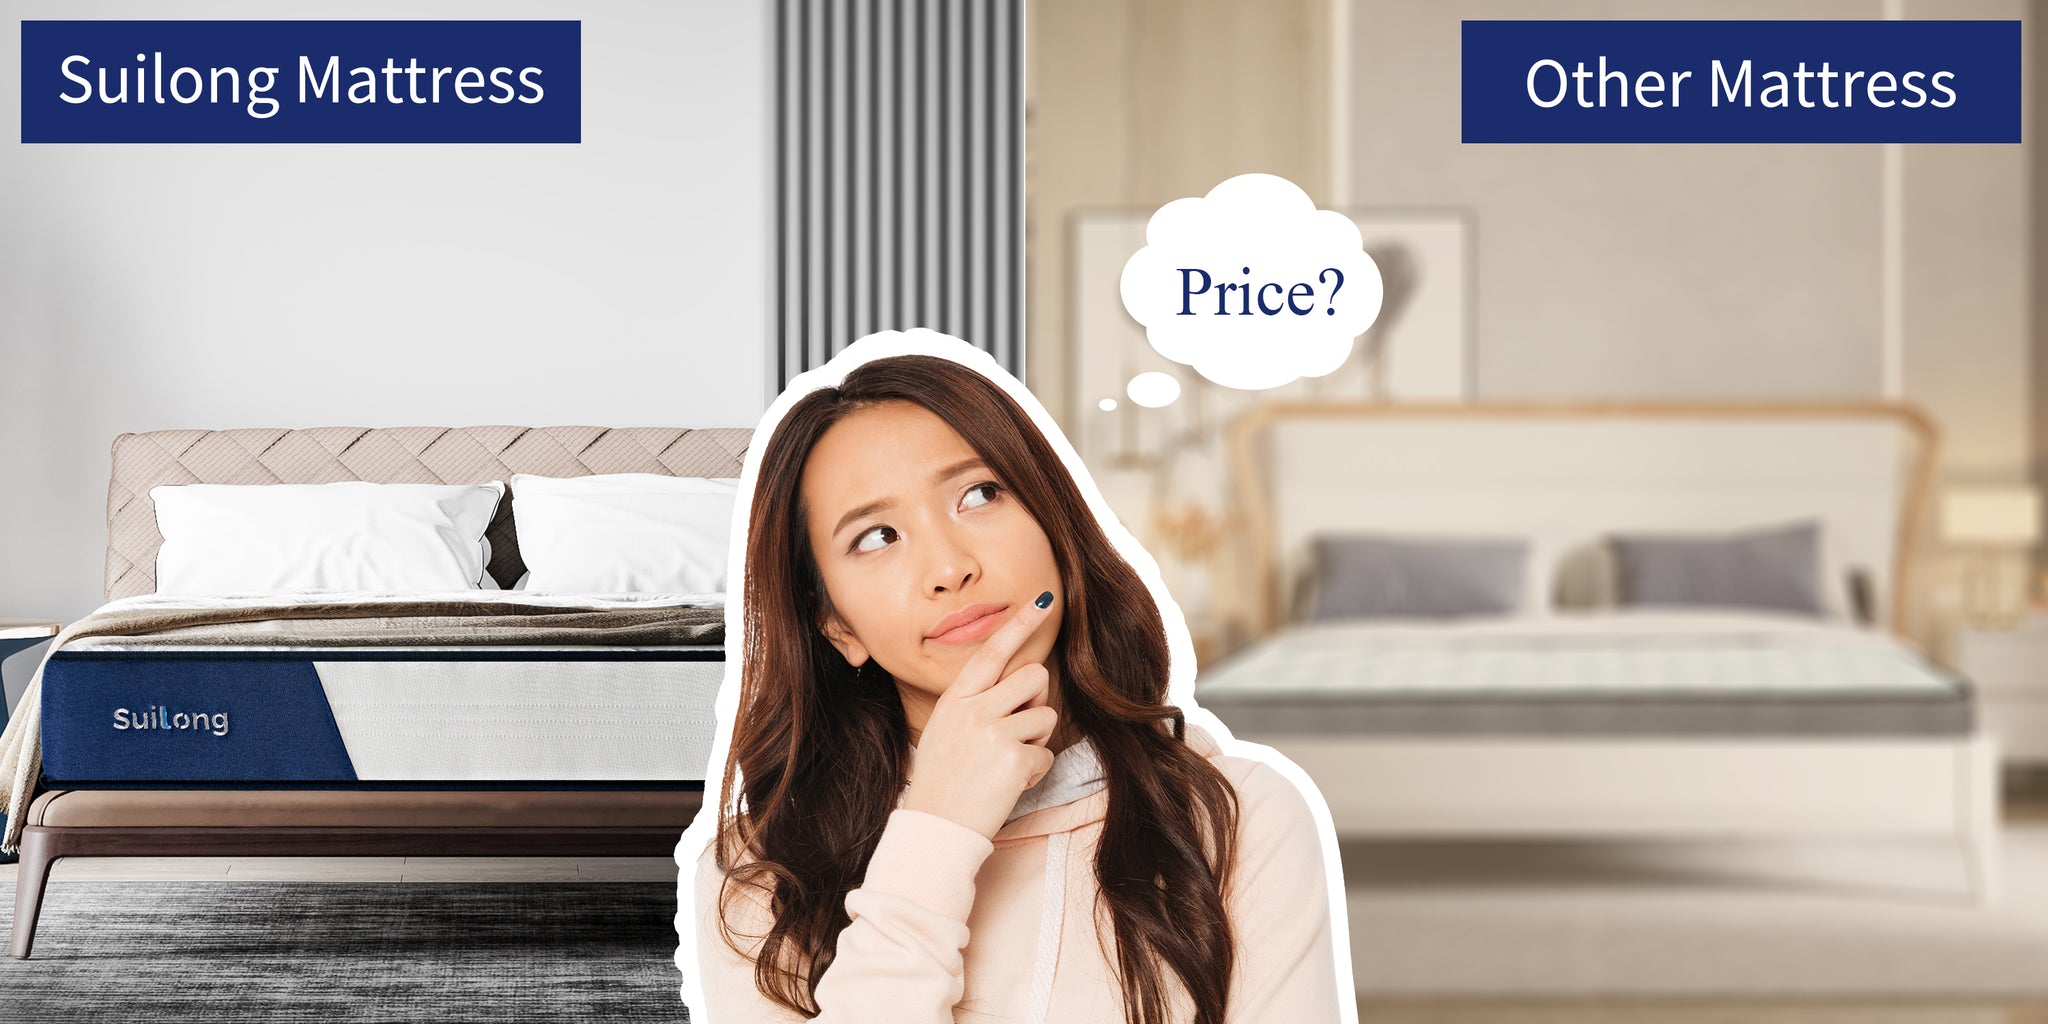 Why is there is a difference in price between mattresses of the different Brands?